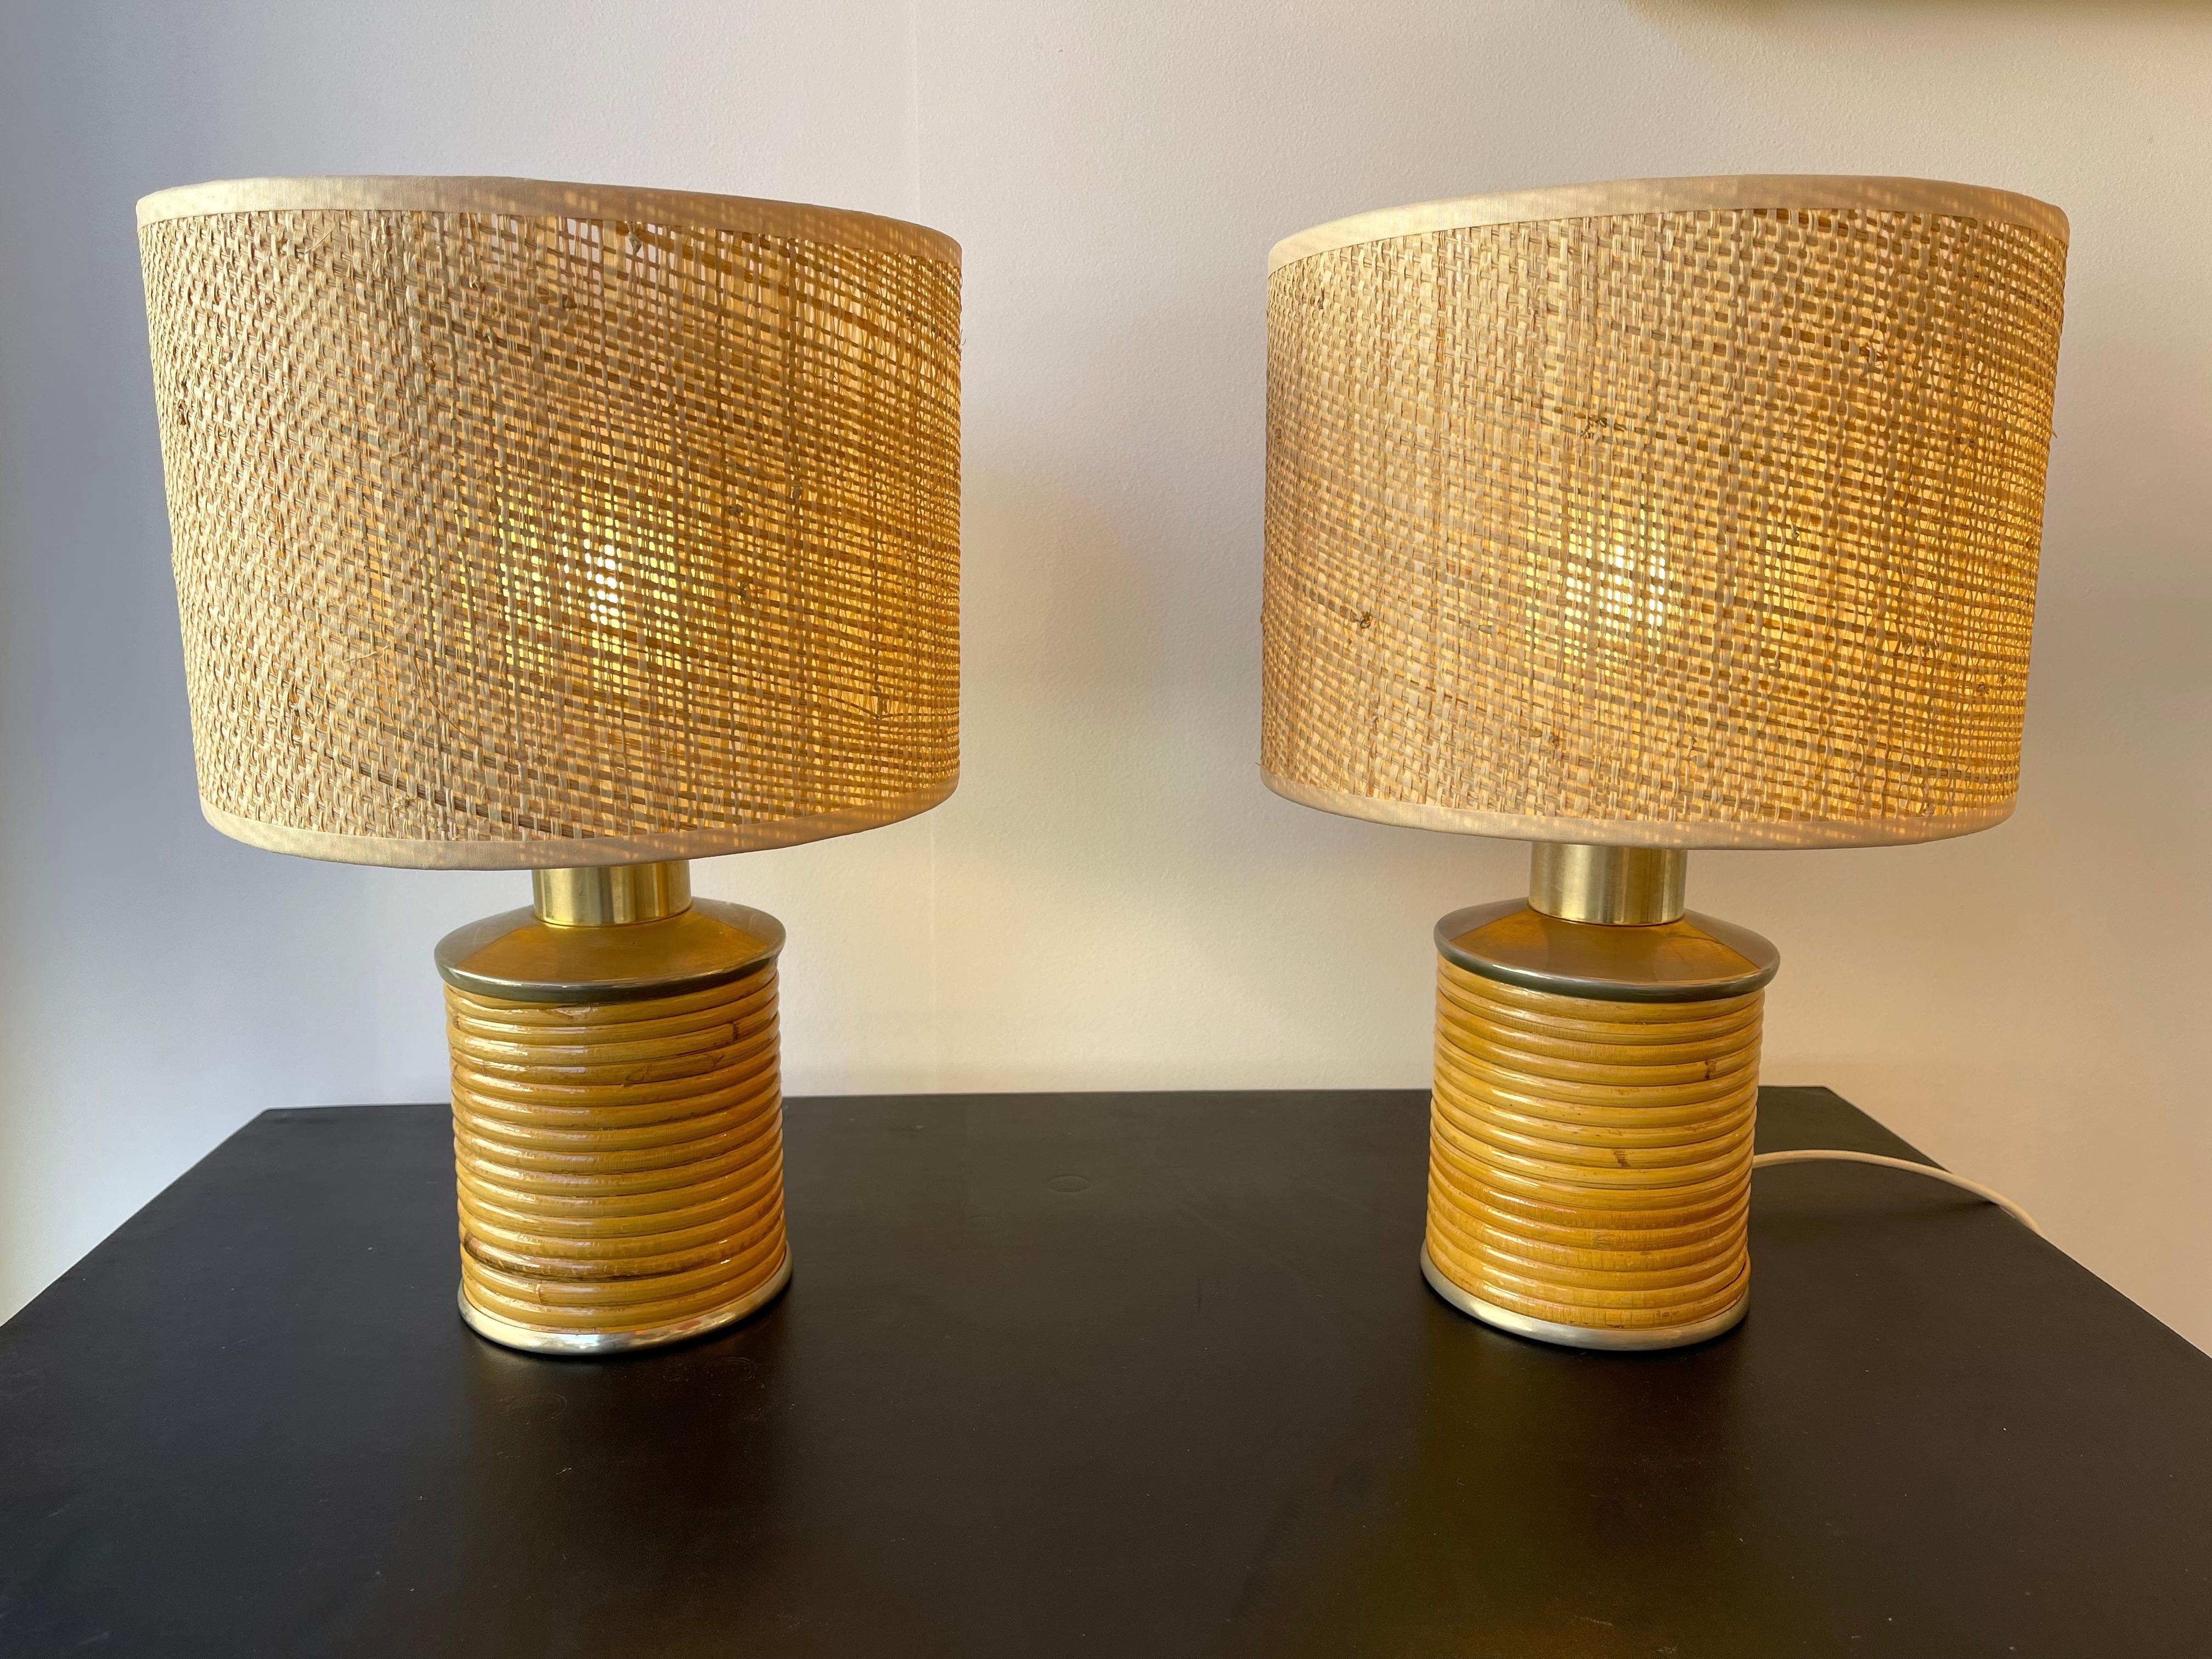 Italian Mid-Century Modern Pair of Rattan and Brass Lamps by Targetti, Italy, 1970s